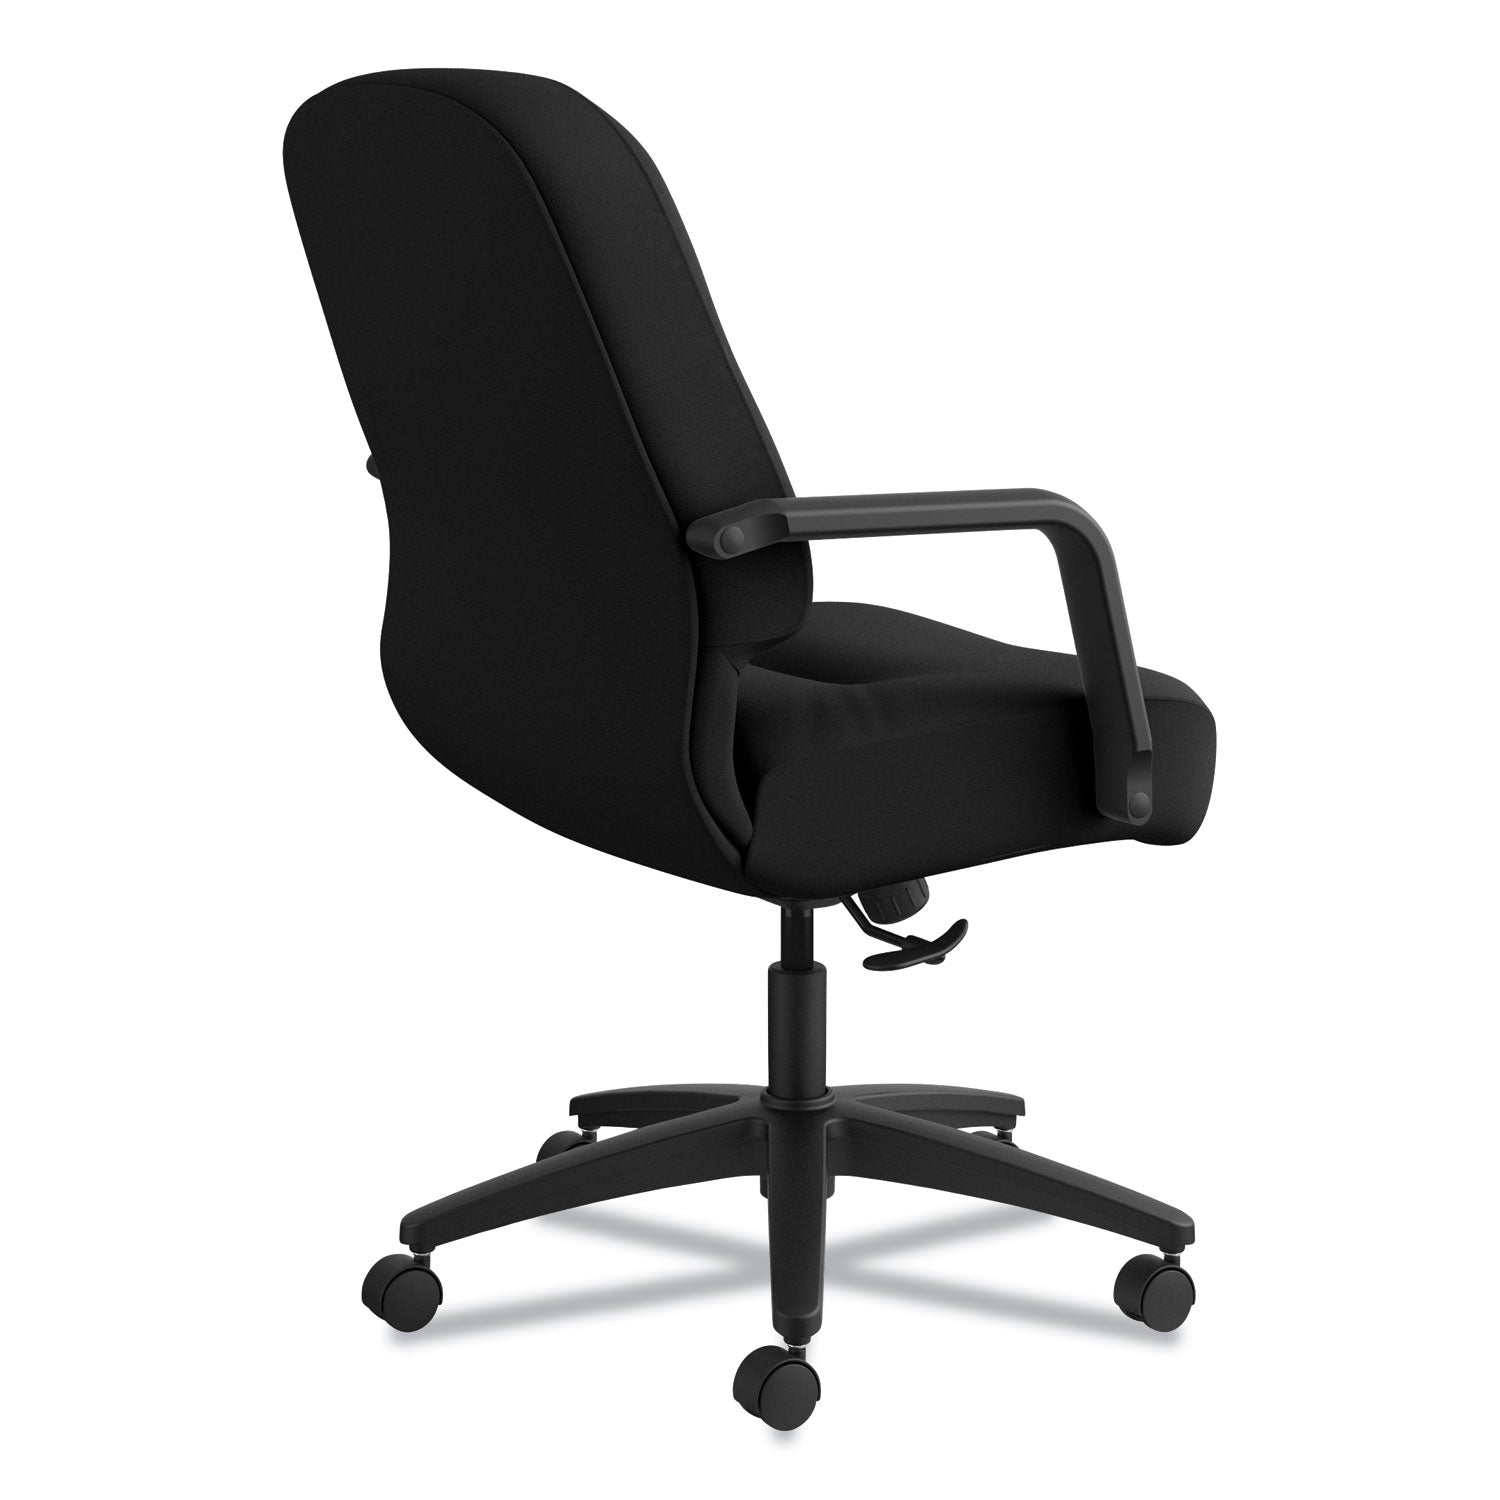 pillow-soft-2090-series-managerial-mid-back-swivel-tilt-chair-supports-up-to-300-lb-17-to-21-seat-height-black_hon2092cu10t - 5